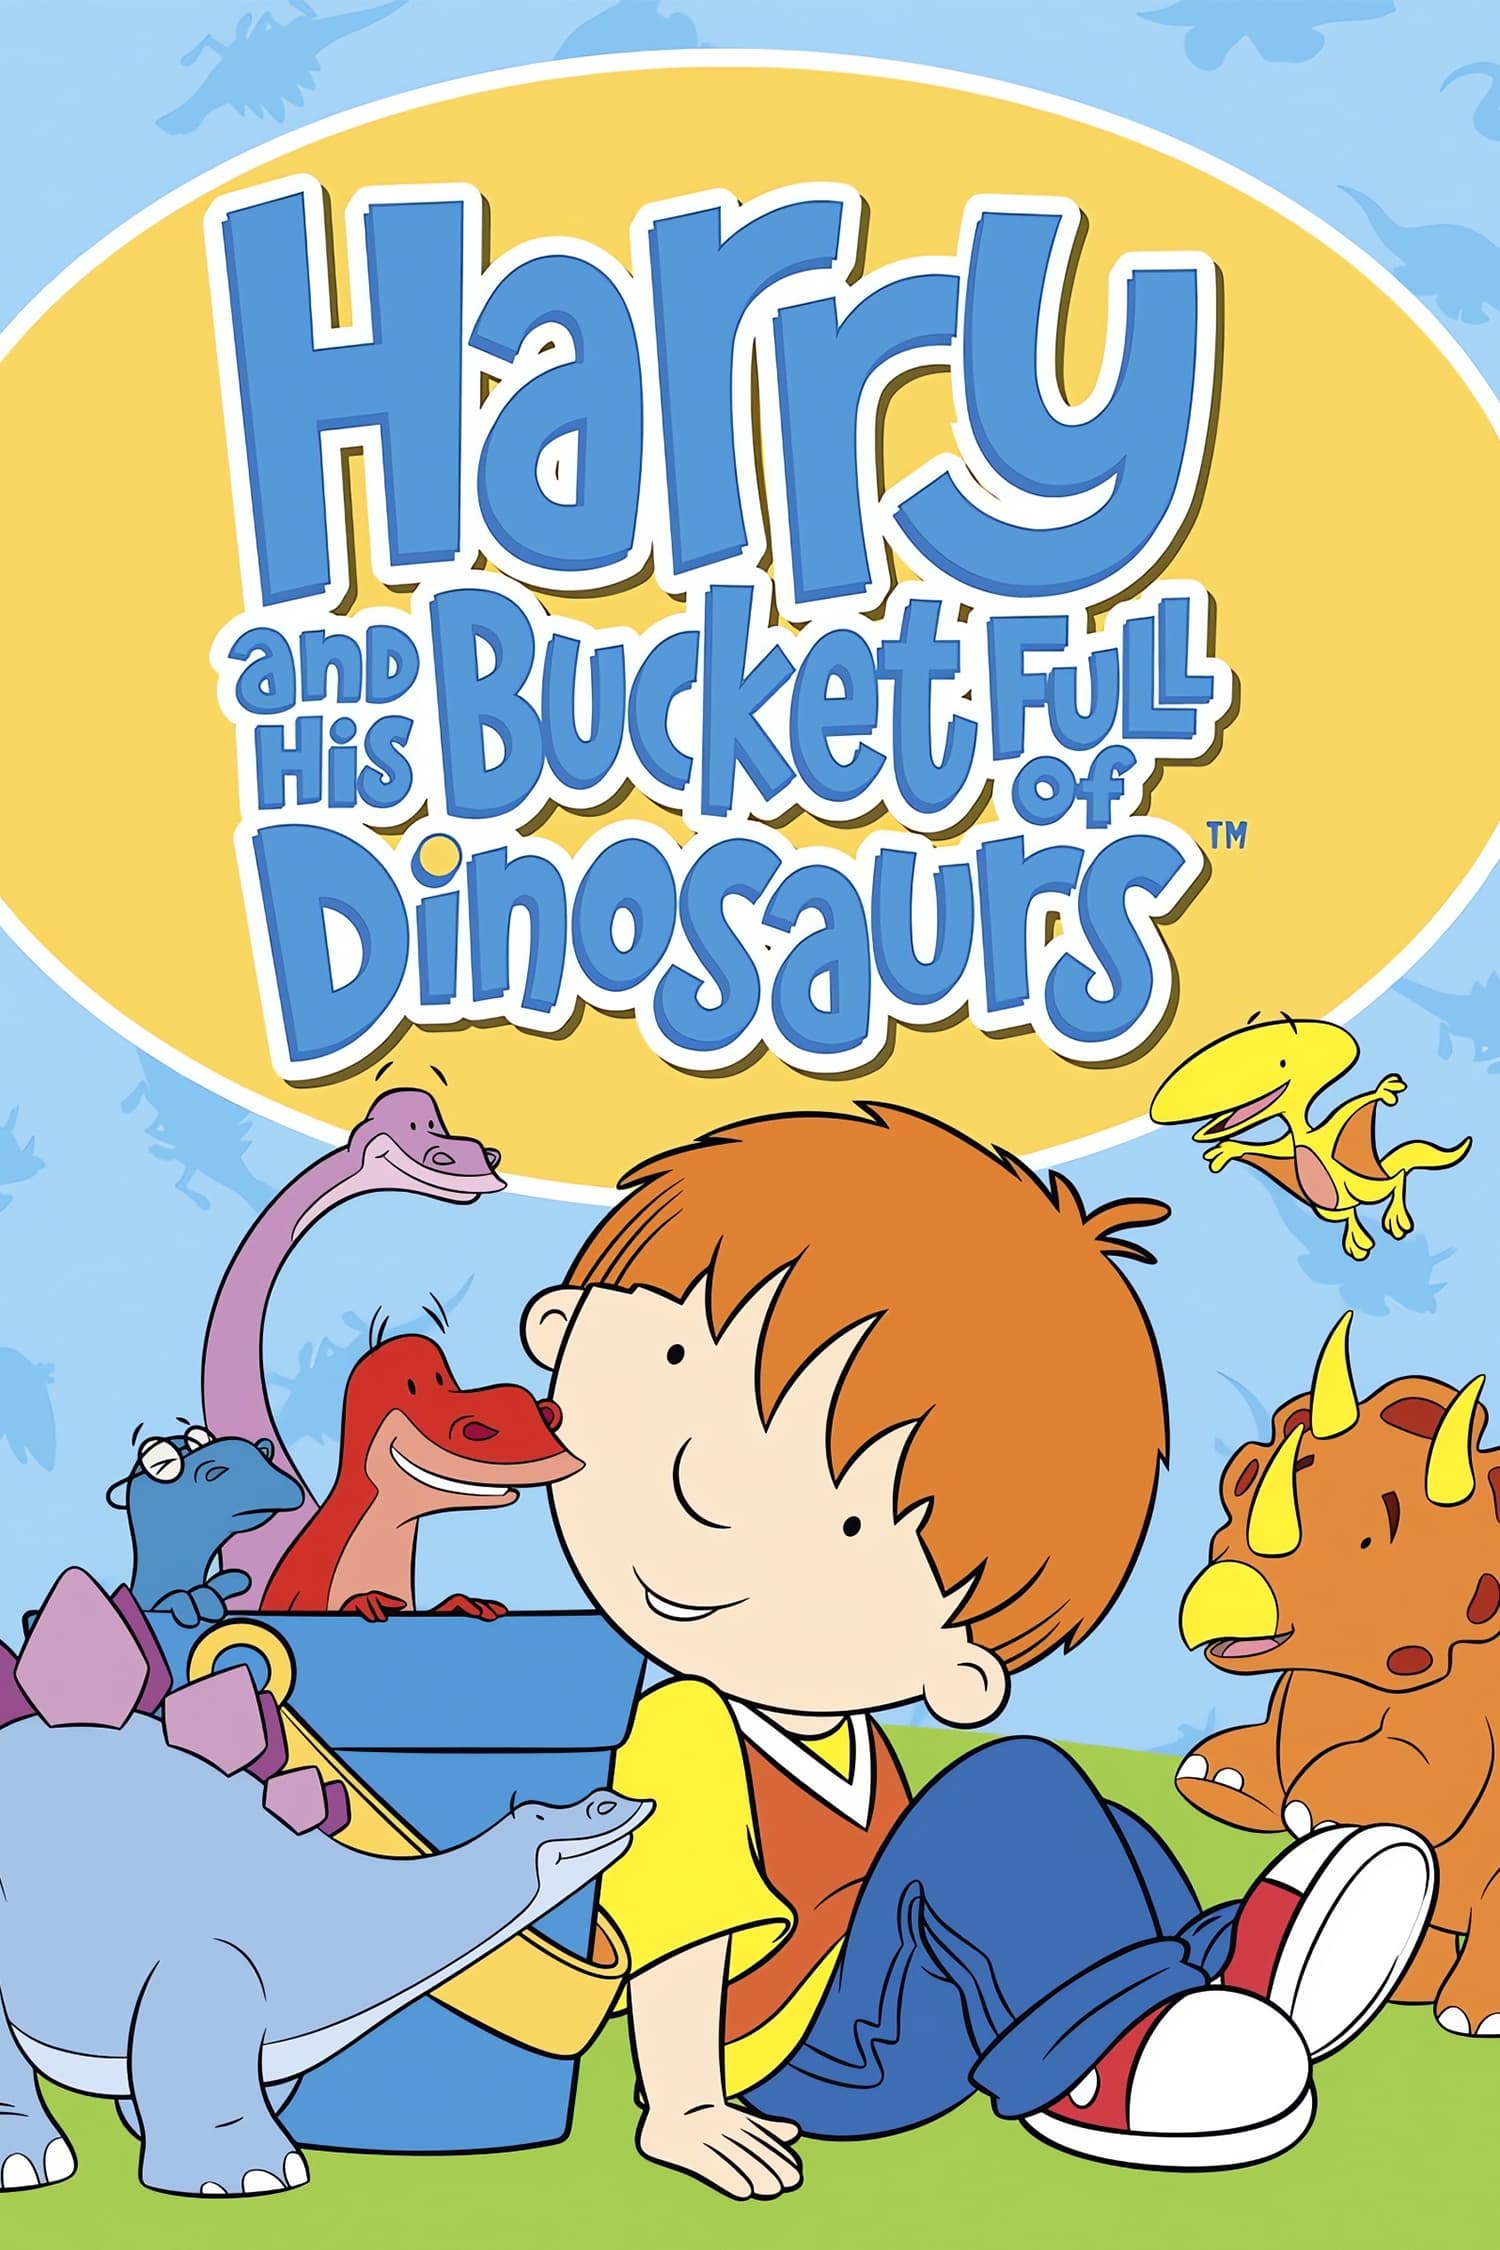 Harry and His Bucket Full of Dinosaurs (2006)